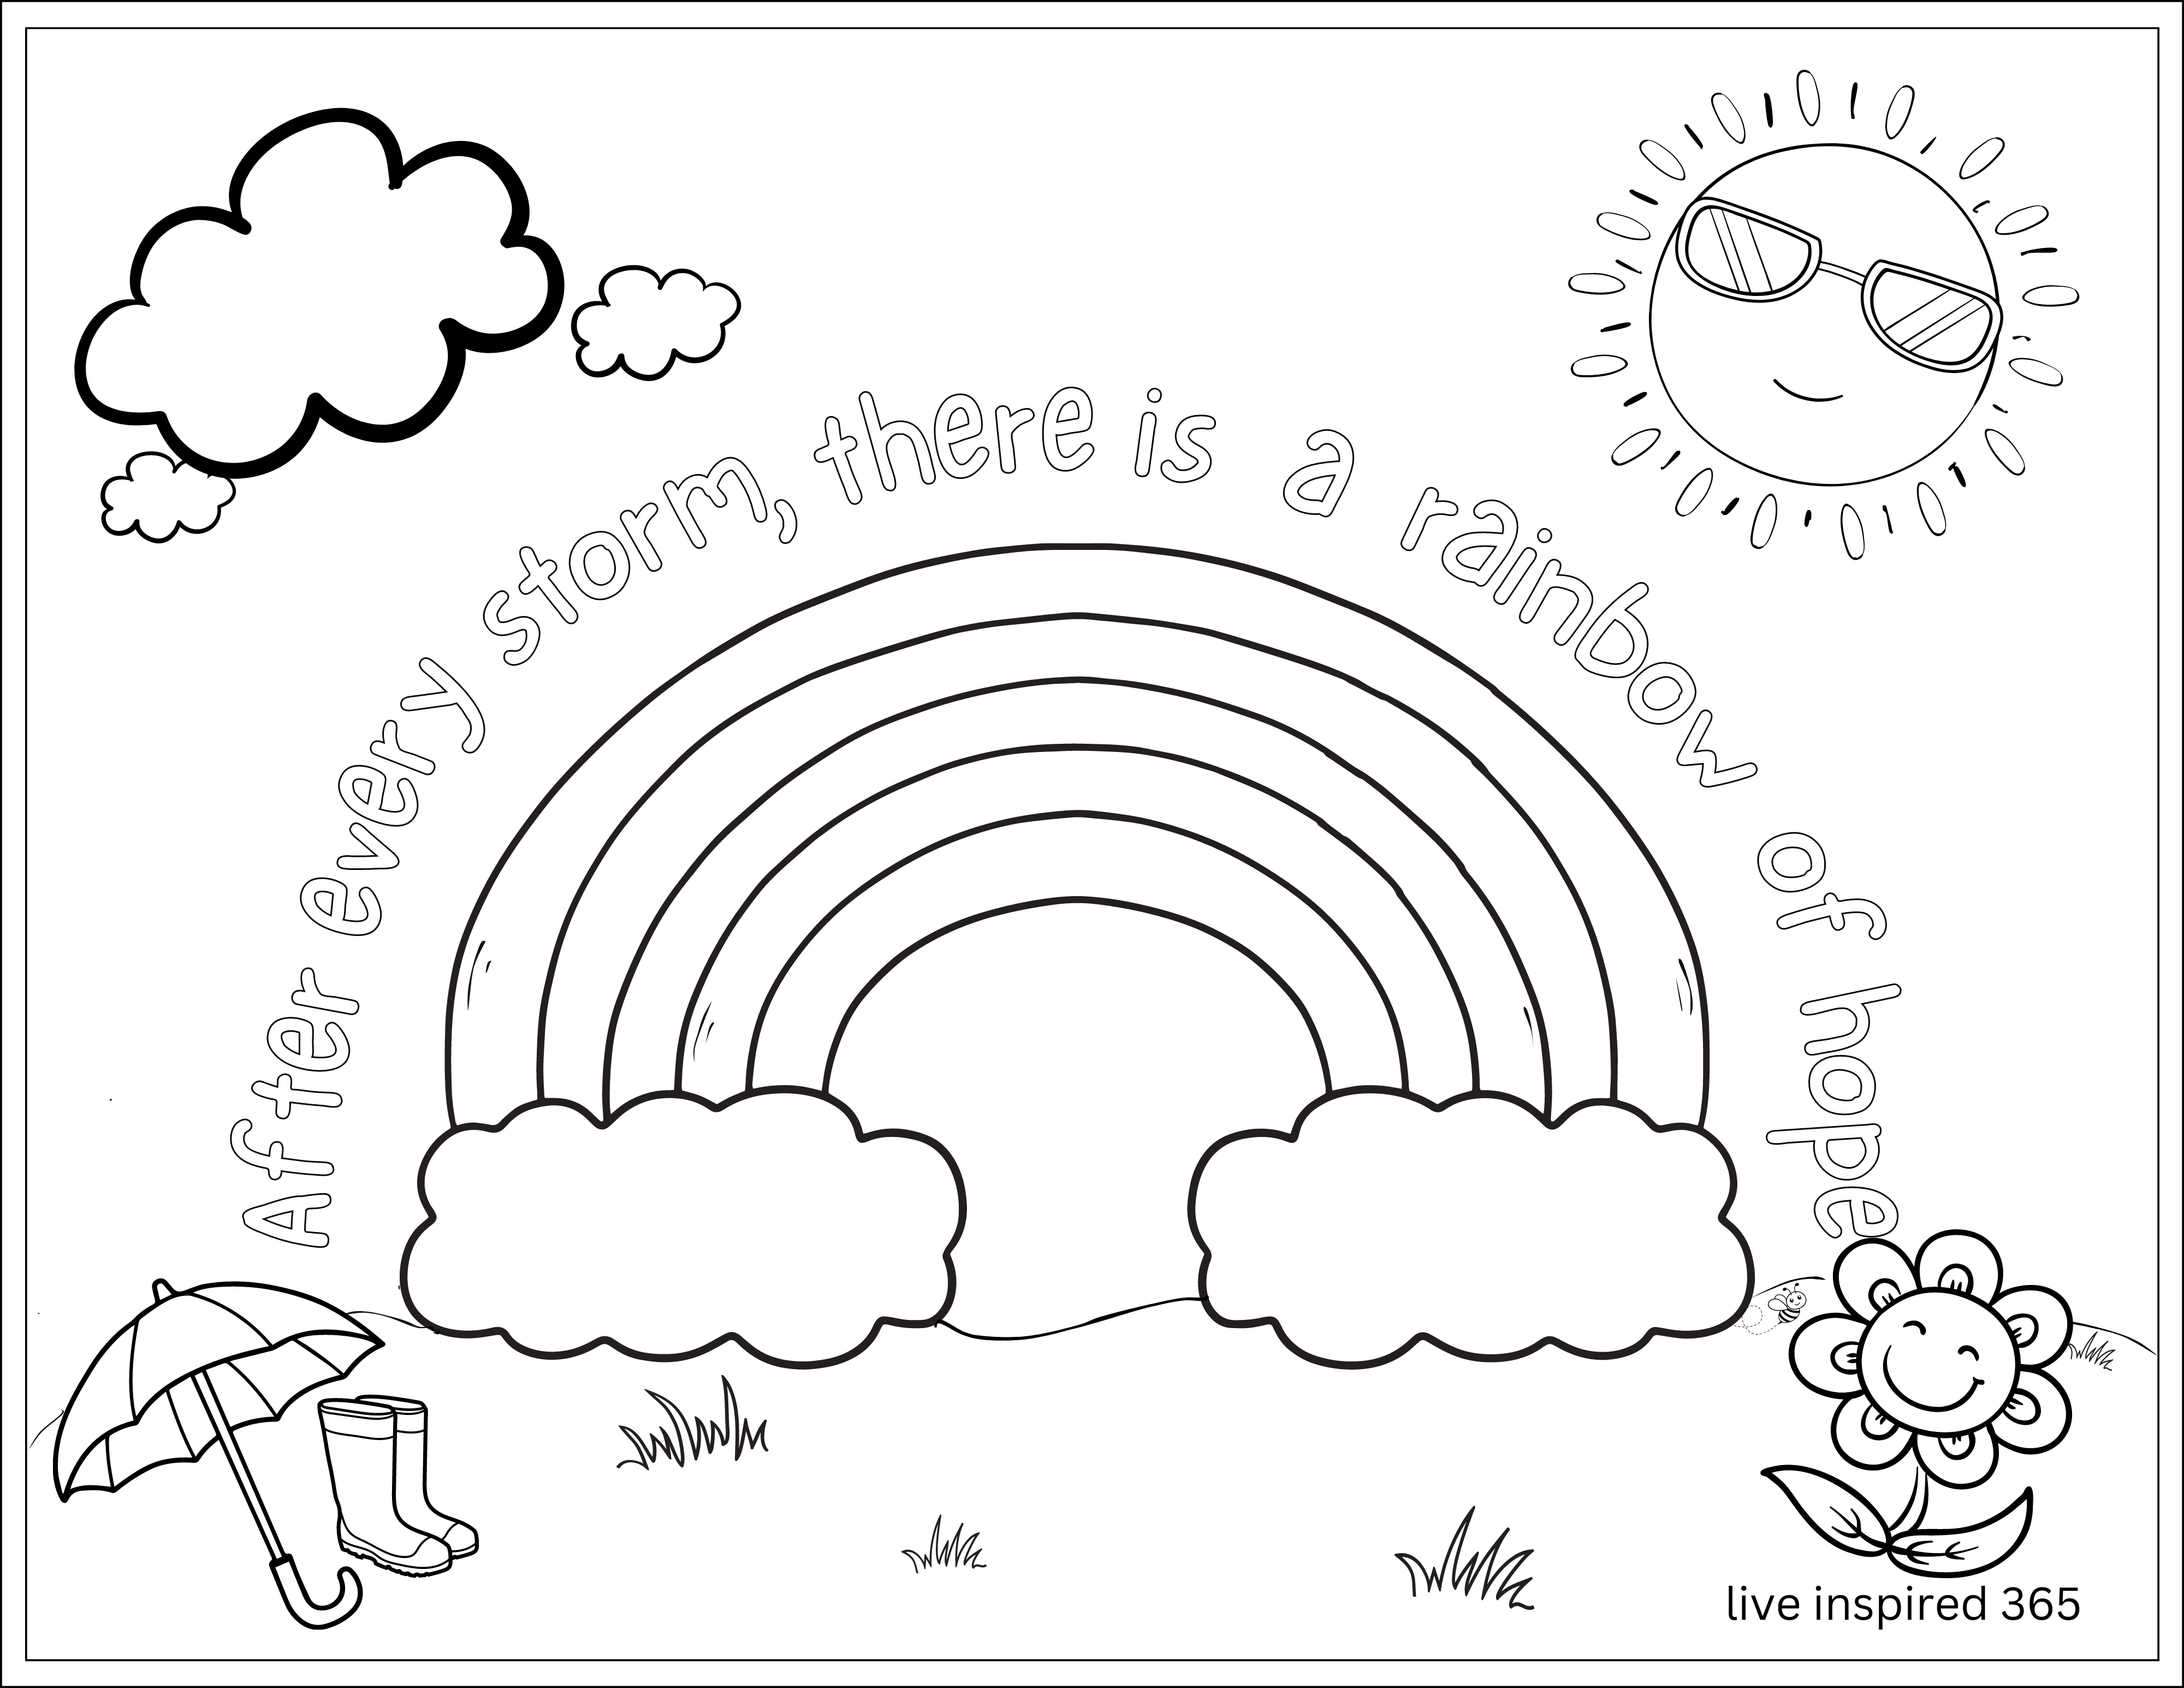 Coloring Pages – live inspired 365